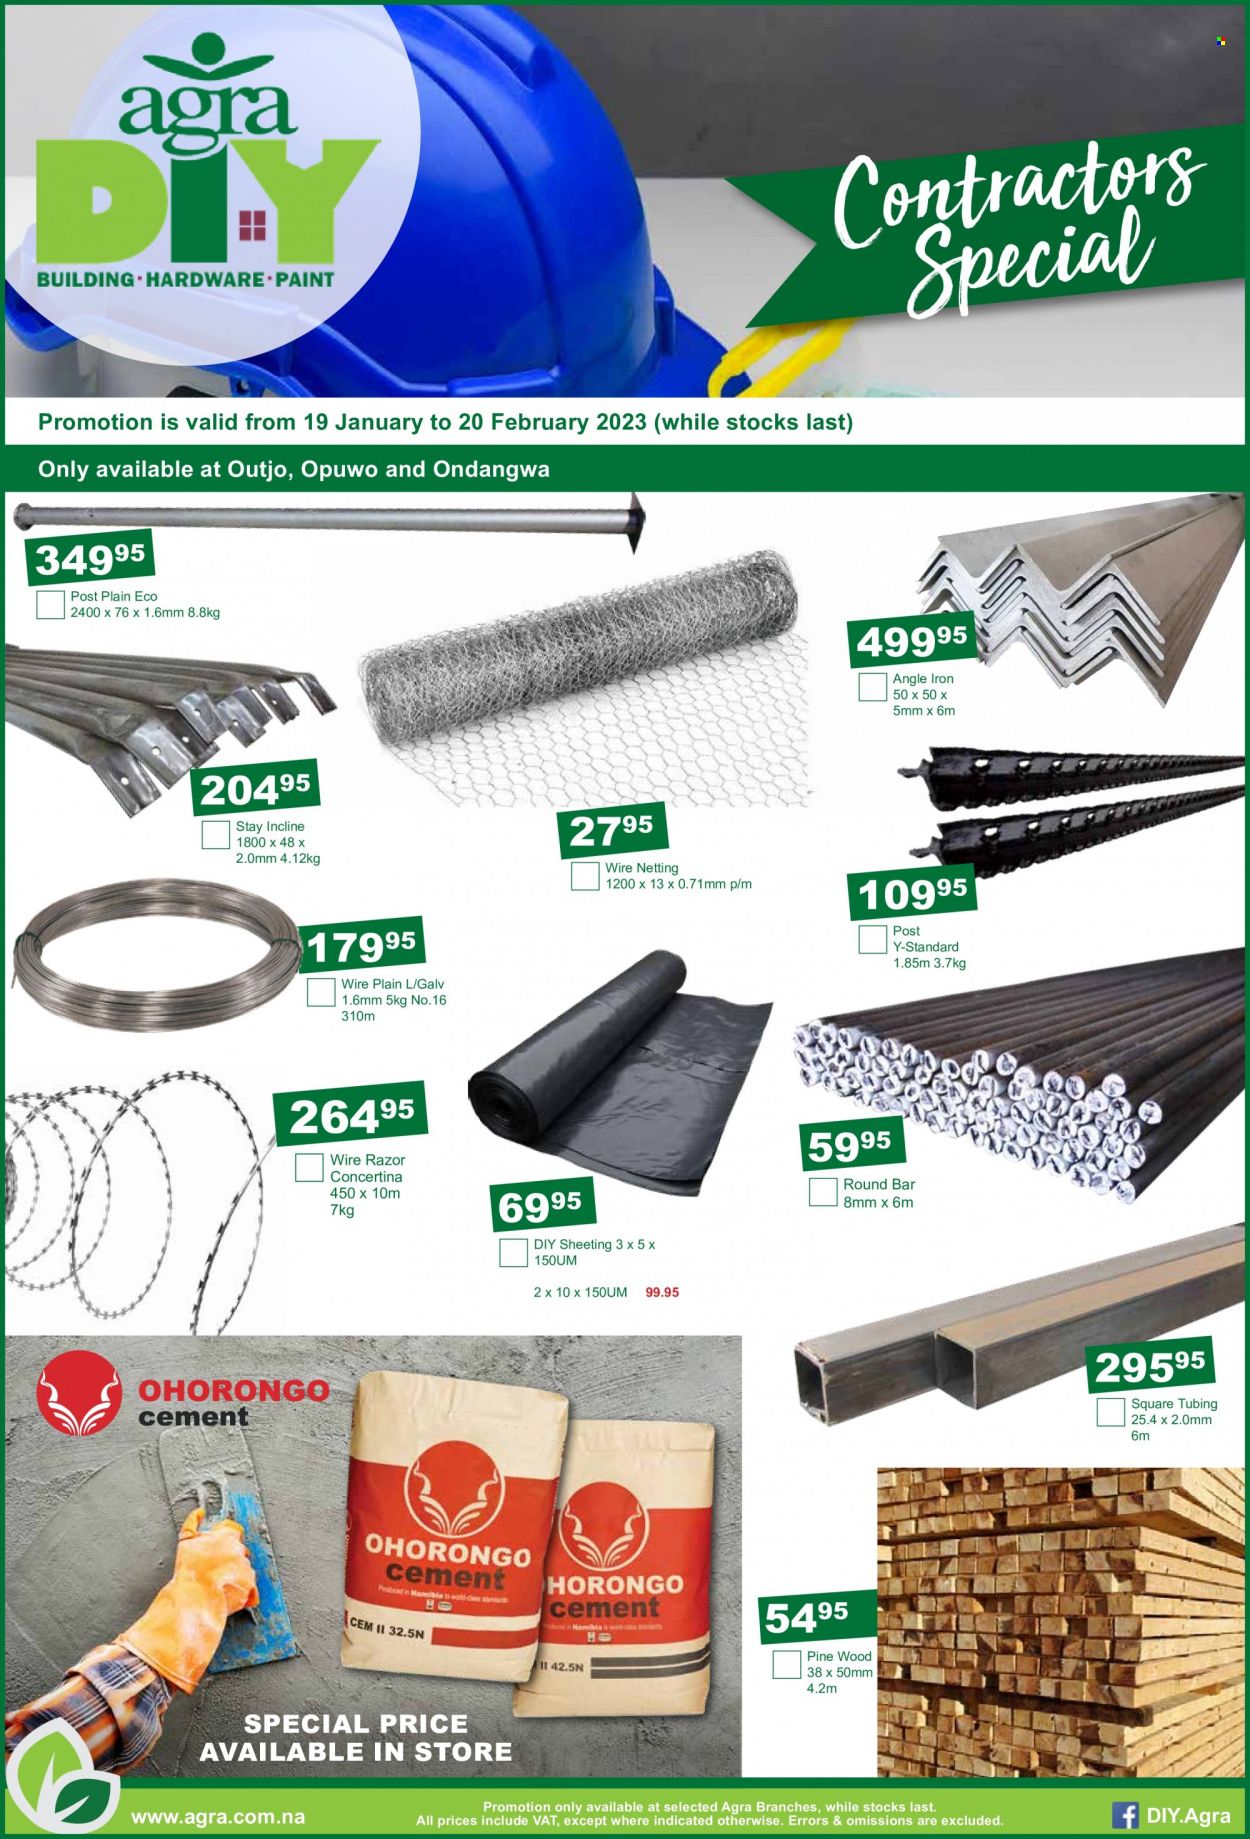 thumbnail - Agra catalogue  - 19/01/2023 - 20/02/2023 - Sales products - sheeting, paint. Page 10.